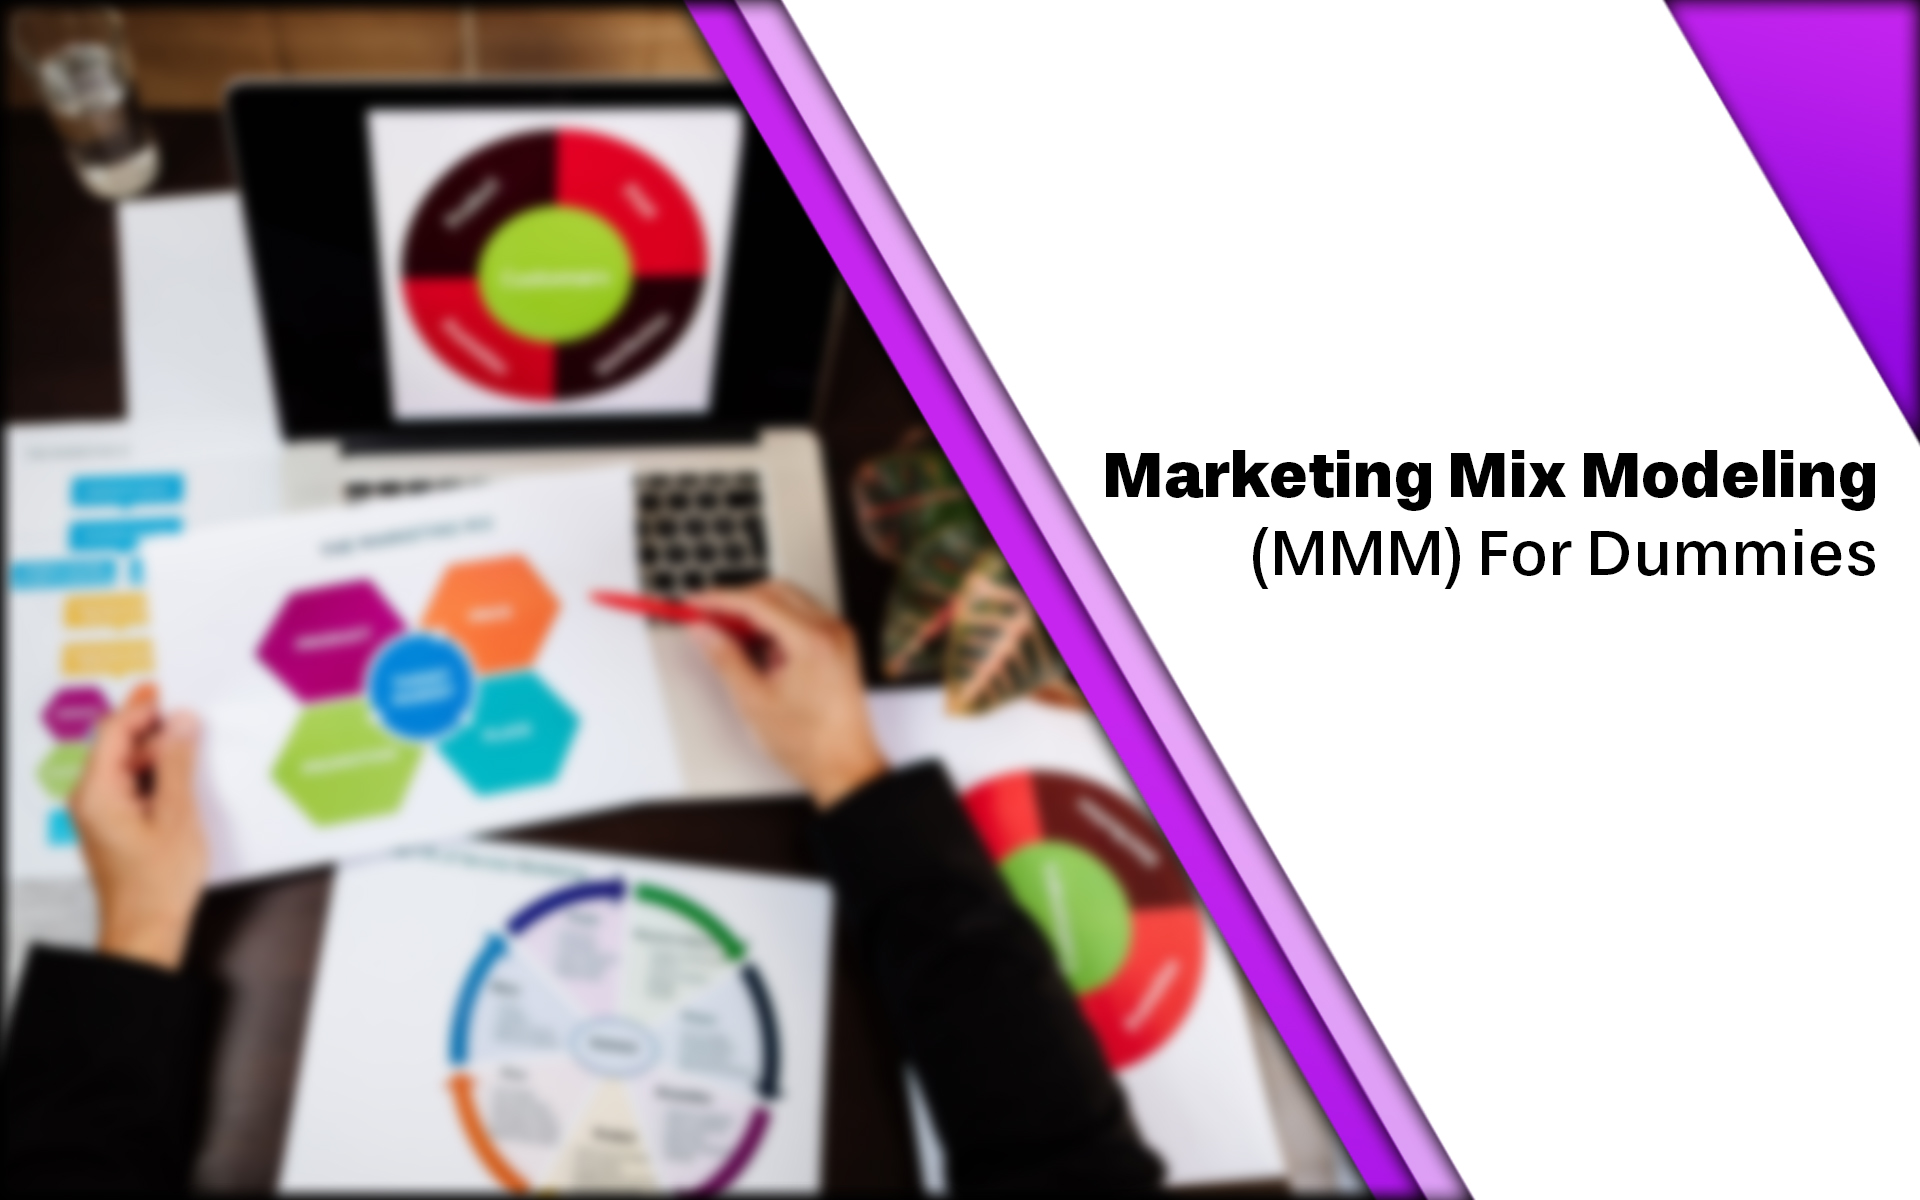 Marketing Mix Modeling by Admiral Media